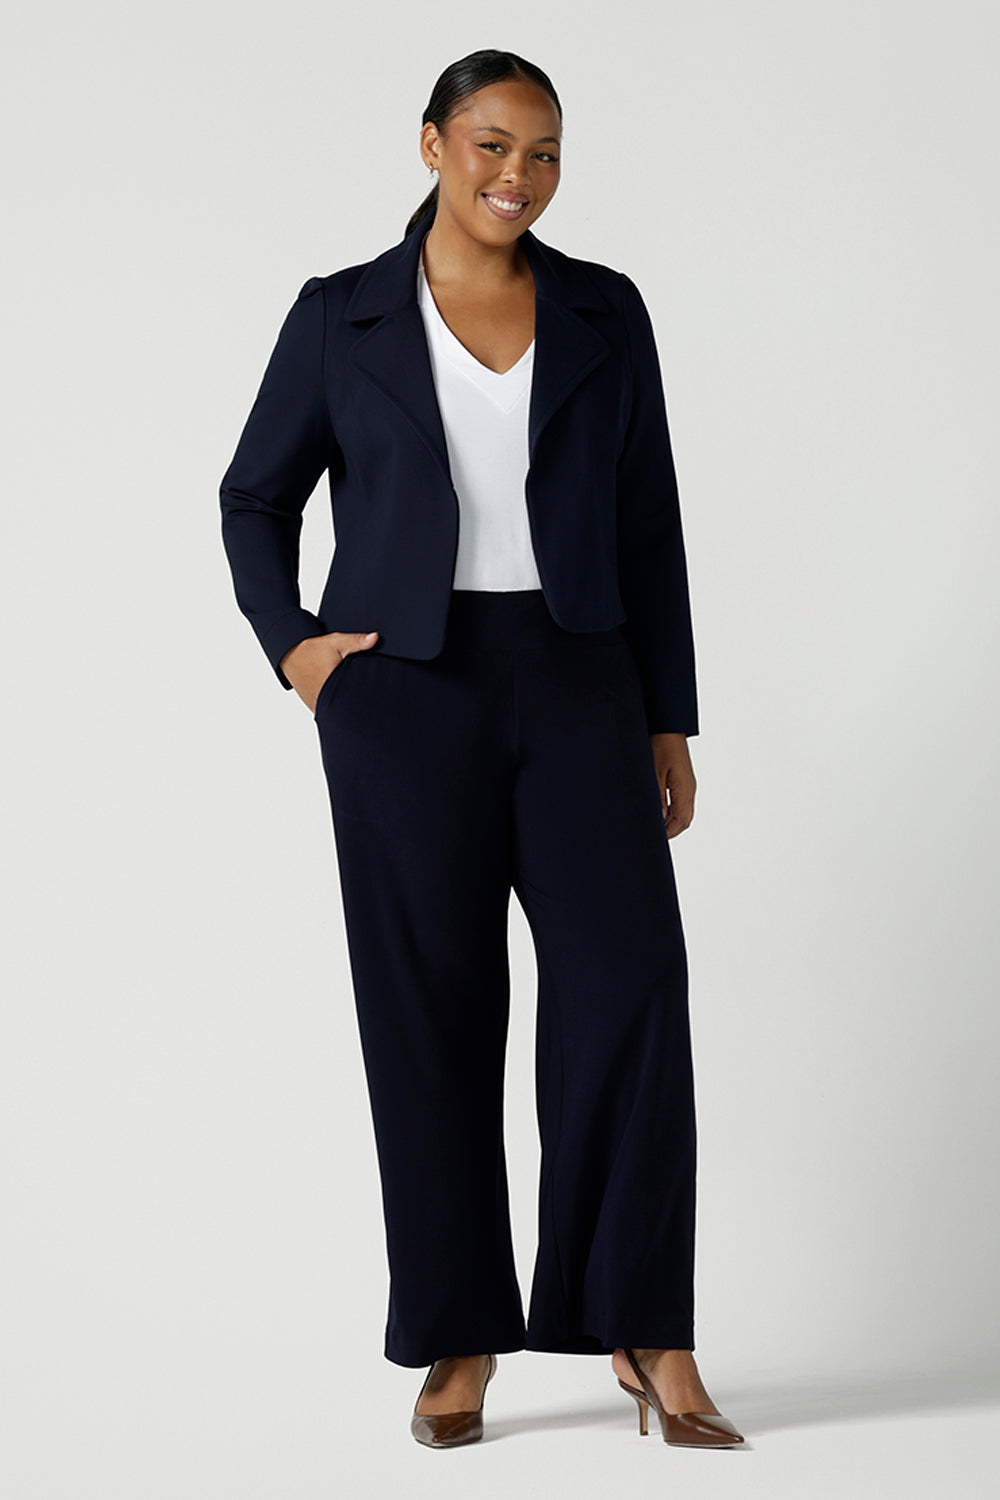 Size 16 woman wears the Garcia Jacket in Navy. Stylish comfortable workwear for women. Tailored with dry touch tech stretch jersey. Made in Australia size 8 - 24.